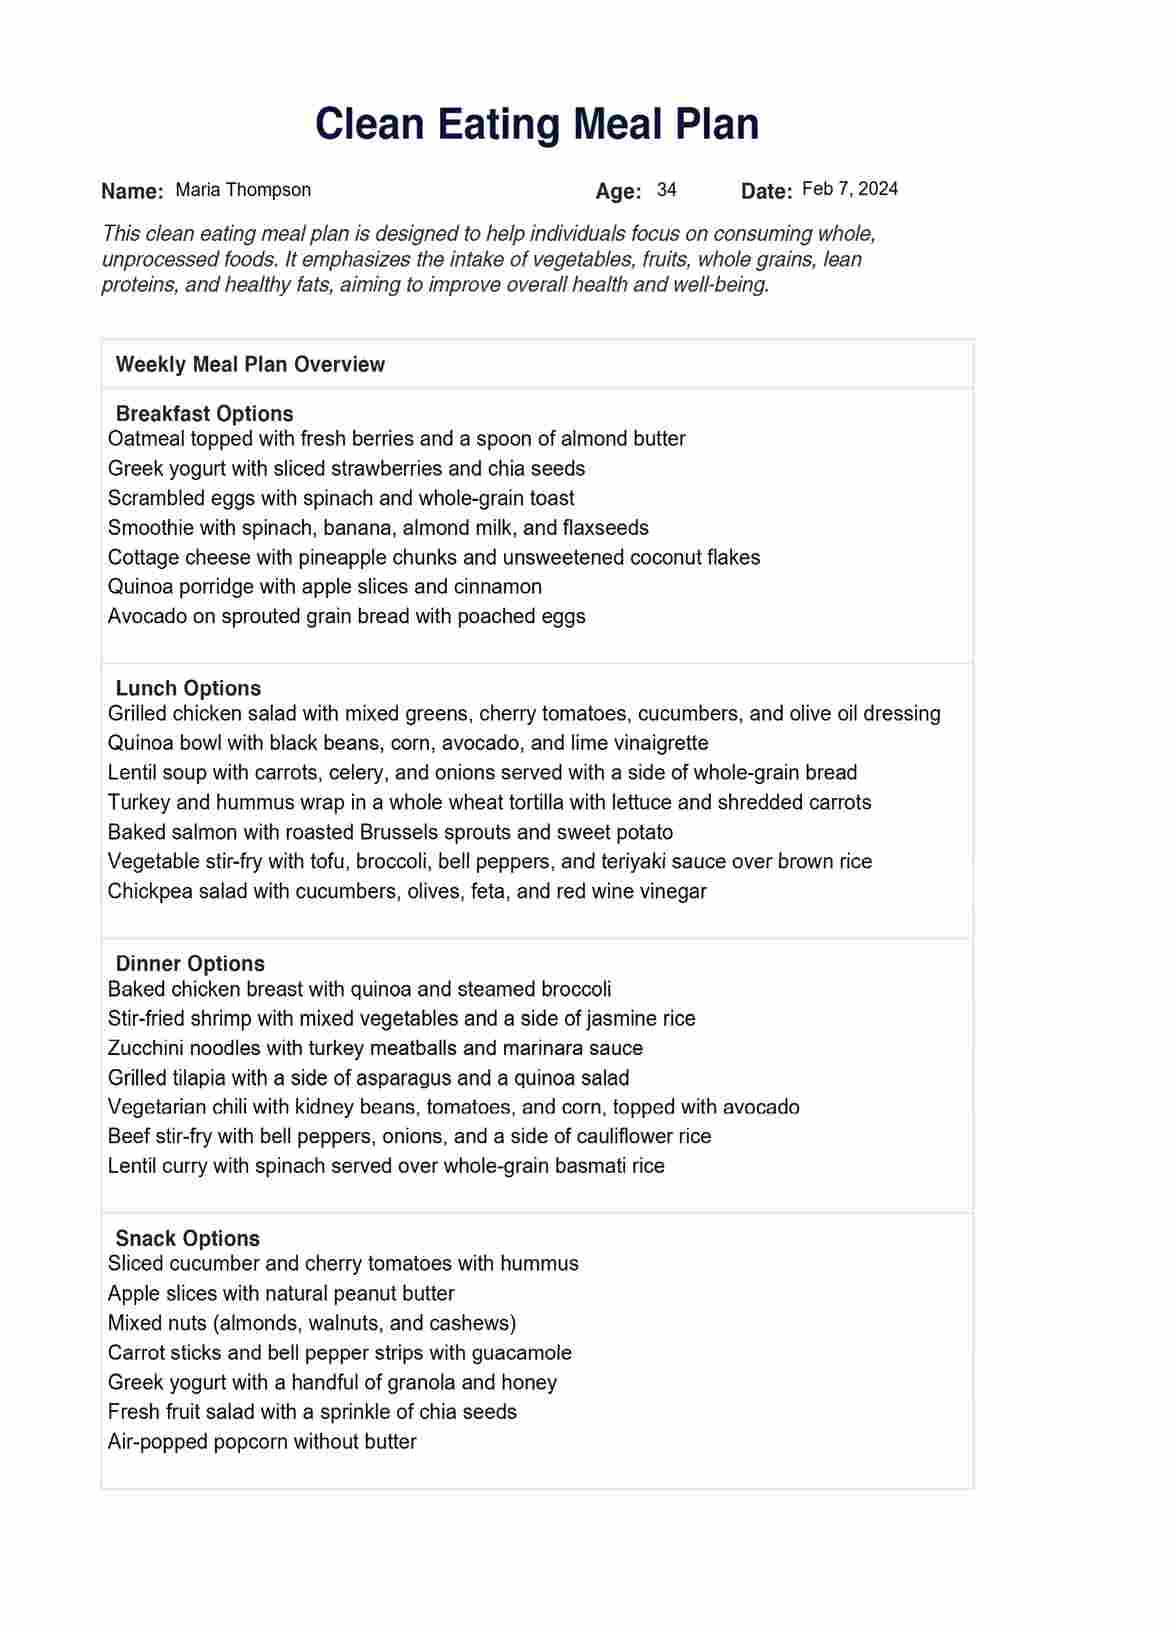 Clean Eating Meal Plan PDF Example